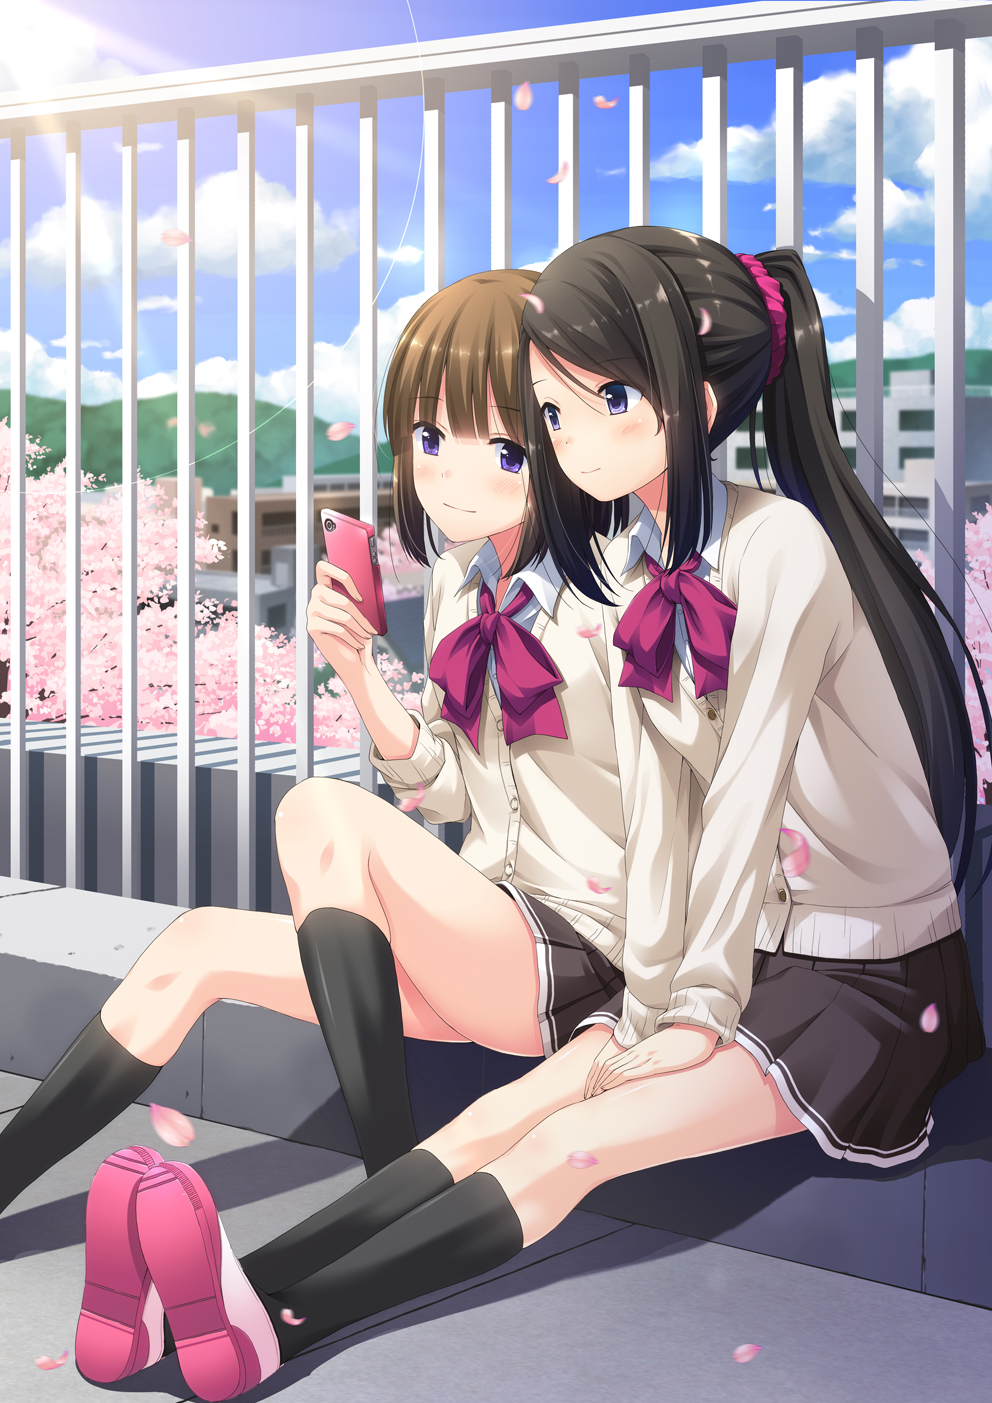 2girls bangs black_hair black_legwear blouse blush bob_cut brown_hair building buttons cardigan cherry_blossoms clouds cloudy_sky eyebrows eyebrows_visible_through_hair hair_ornament hair_scrunchie hands_on_thighs highres hill holding holding_phone legs_together light_smile long_hair long_sleeves multiple_girls original outdoors parted_bangs phone pink_shoes pleated_skirt ponytail railing rooftop school_uniform scrunchie shoes sidelocks sitting skirt sky smile sun tree violet_eyes white_blouse yoruda